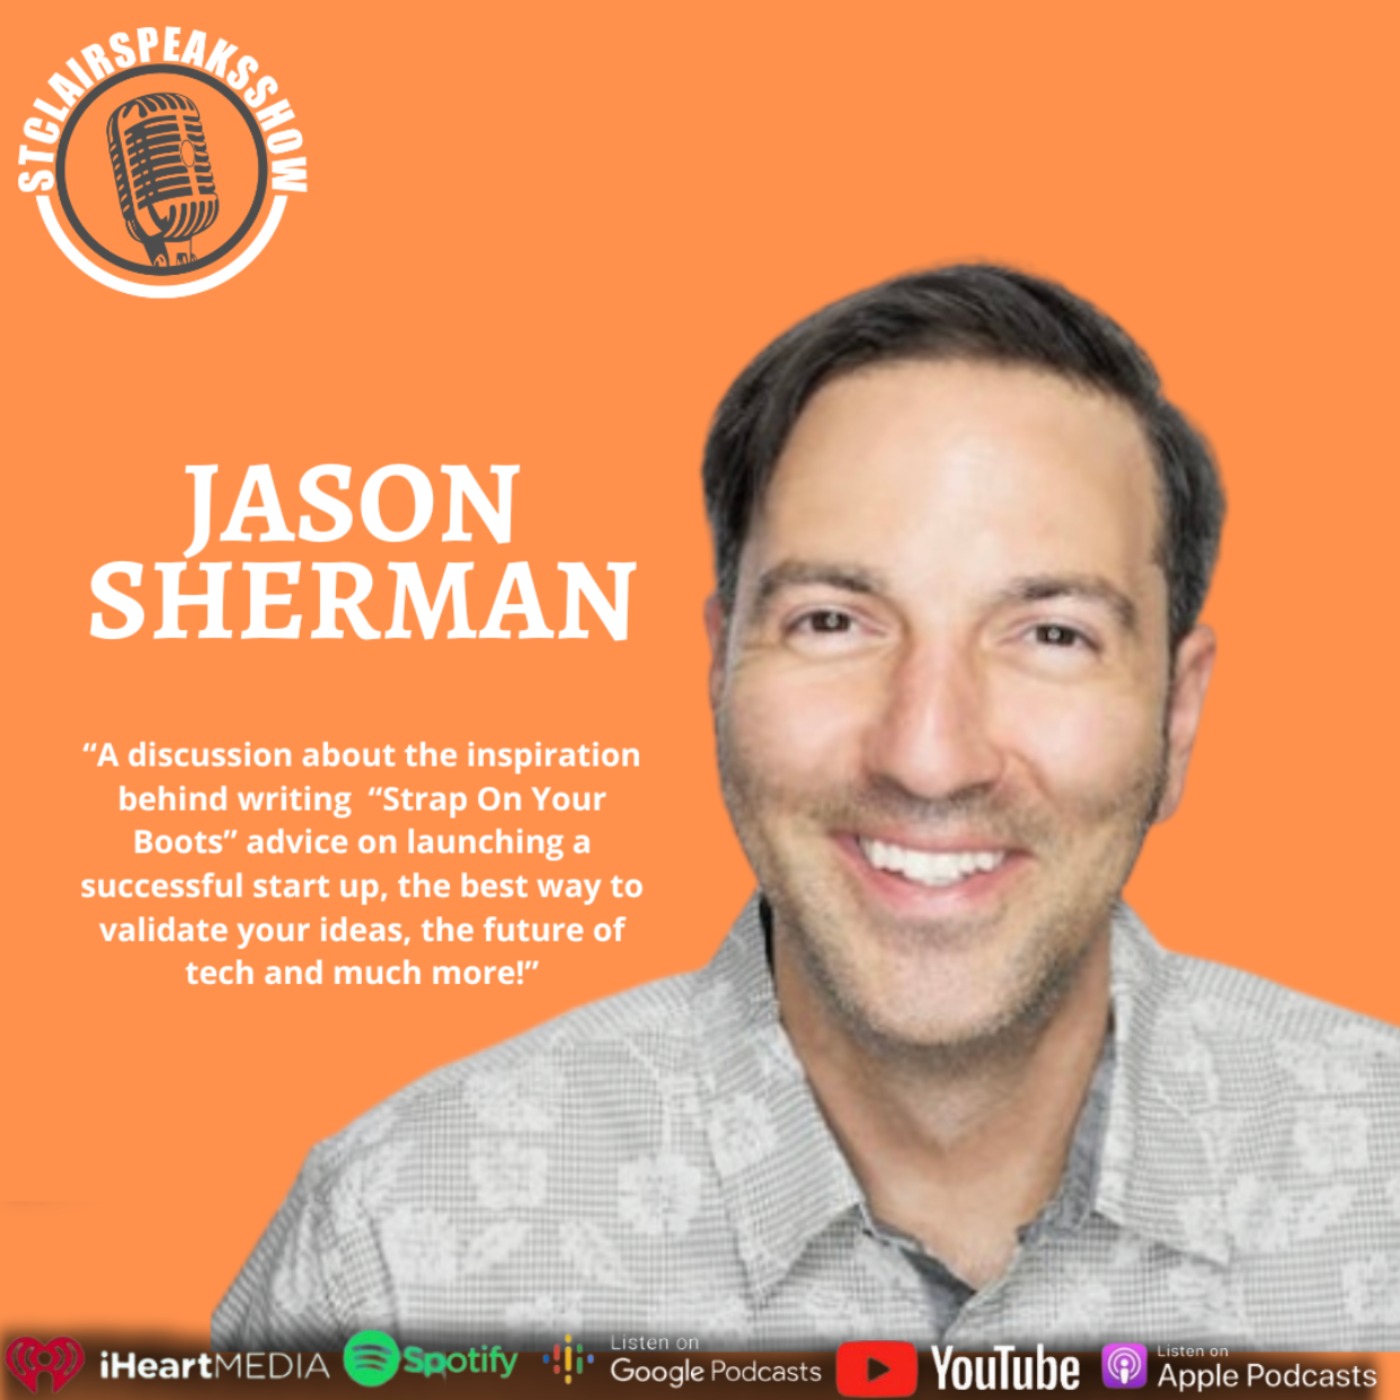 The StclairclairSpeaksShow featuring Jason Sherman How to properly build a minimum viable product and have a beta launch? Image